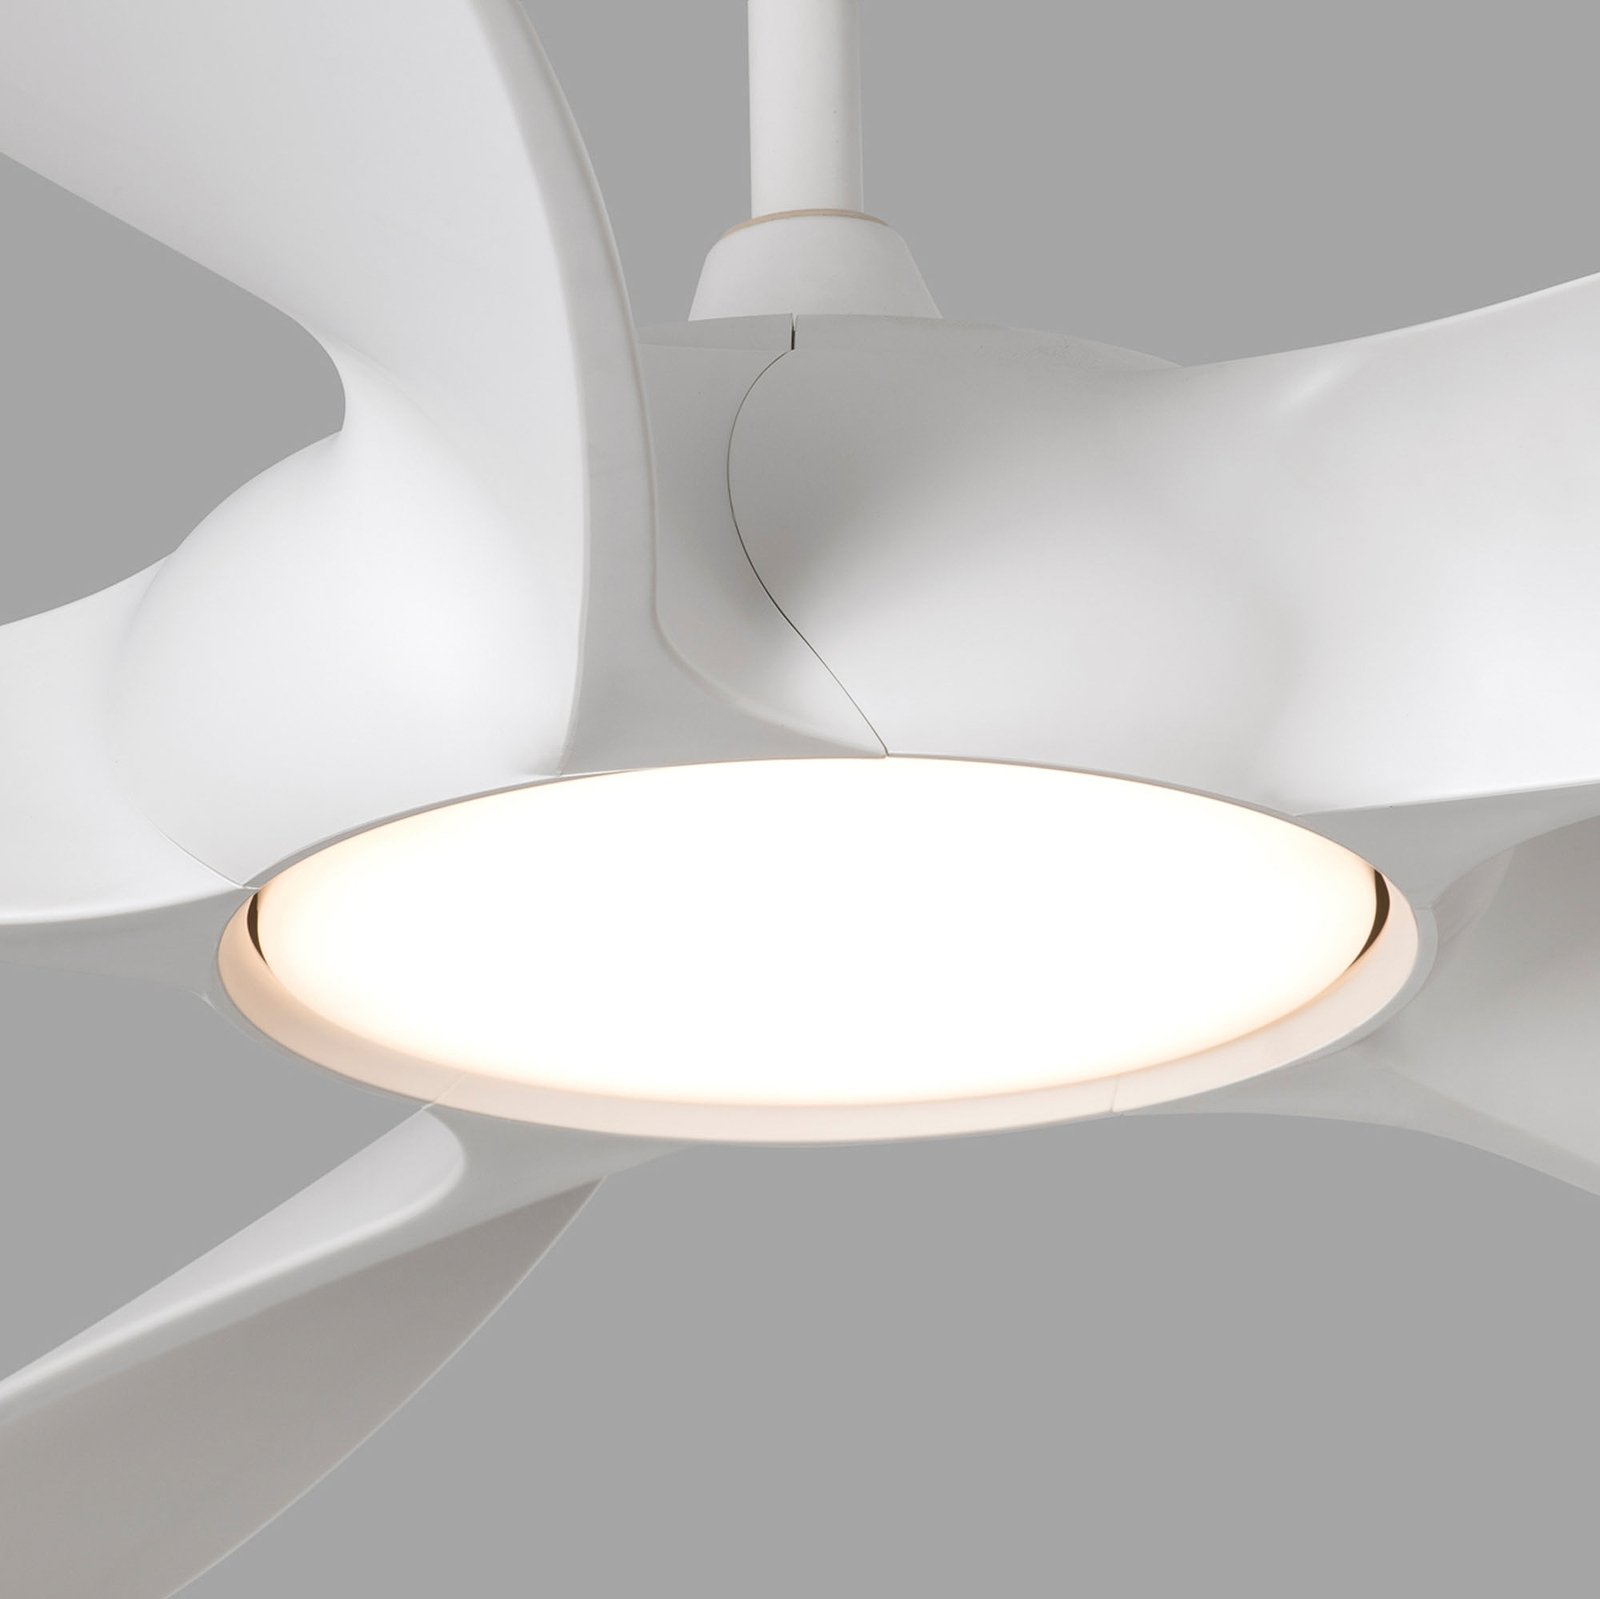 Cocos L ceiling fan with an LED light, DC, white